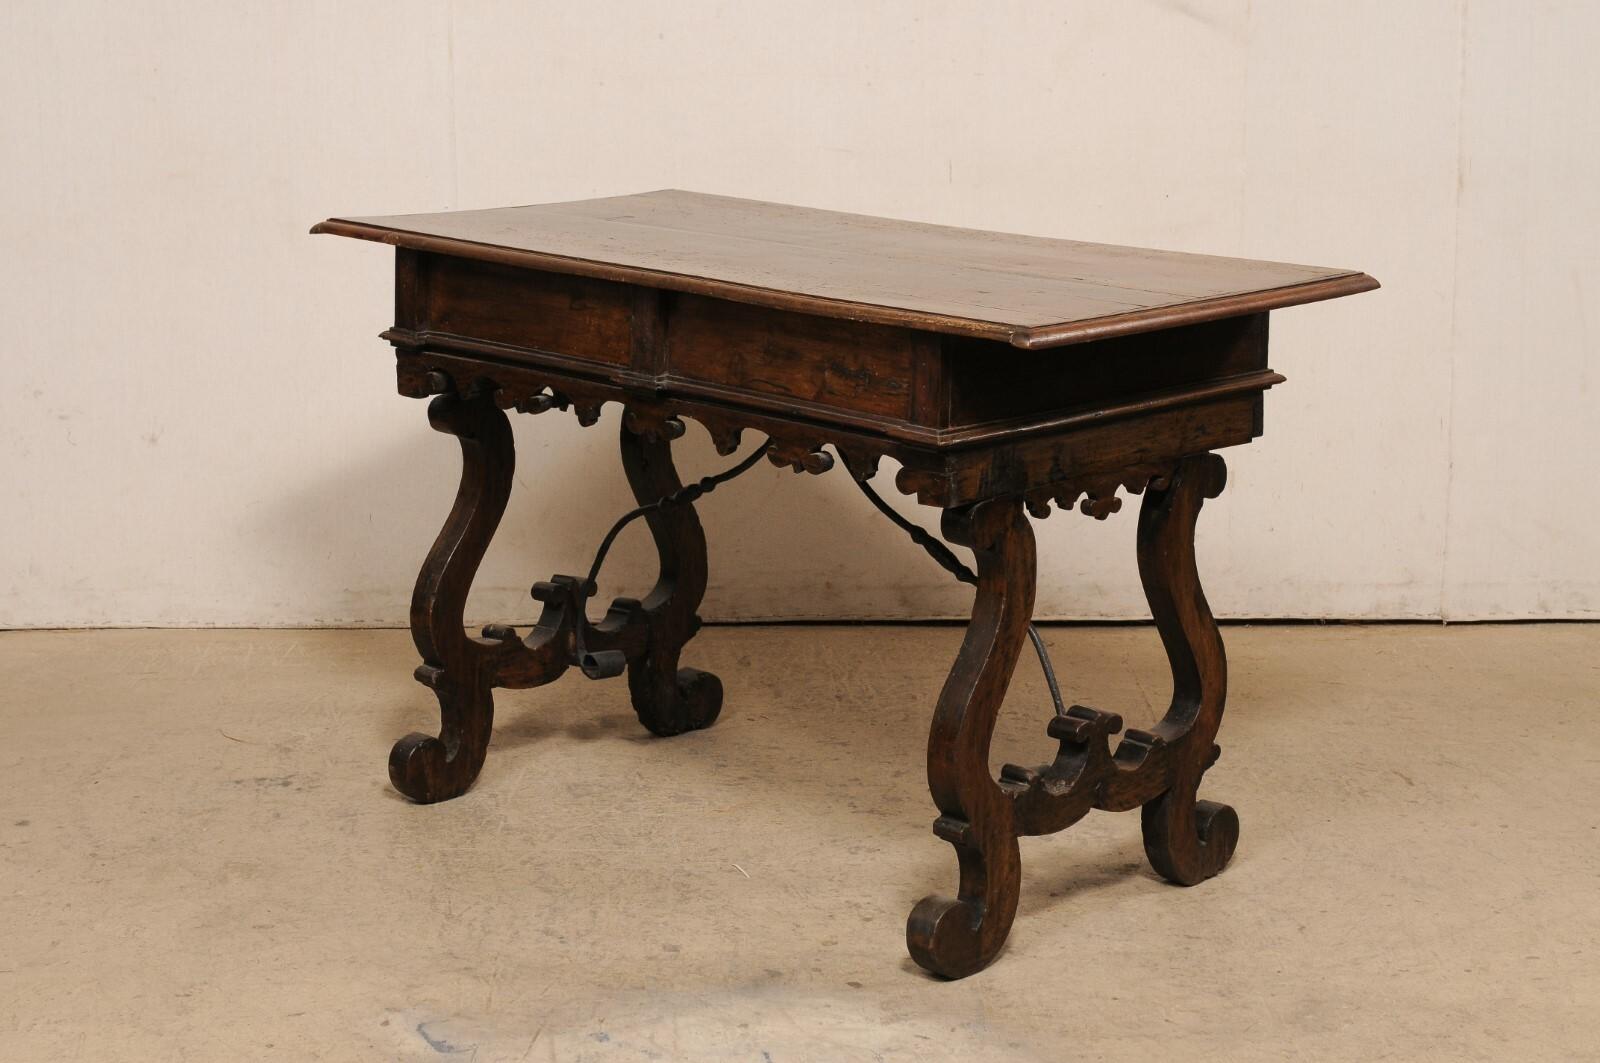 19th Century Late 18th Century Italian Fratino Table w/Drawers & Forged Iron Stretcher For Sale